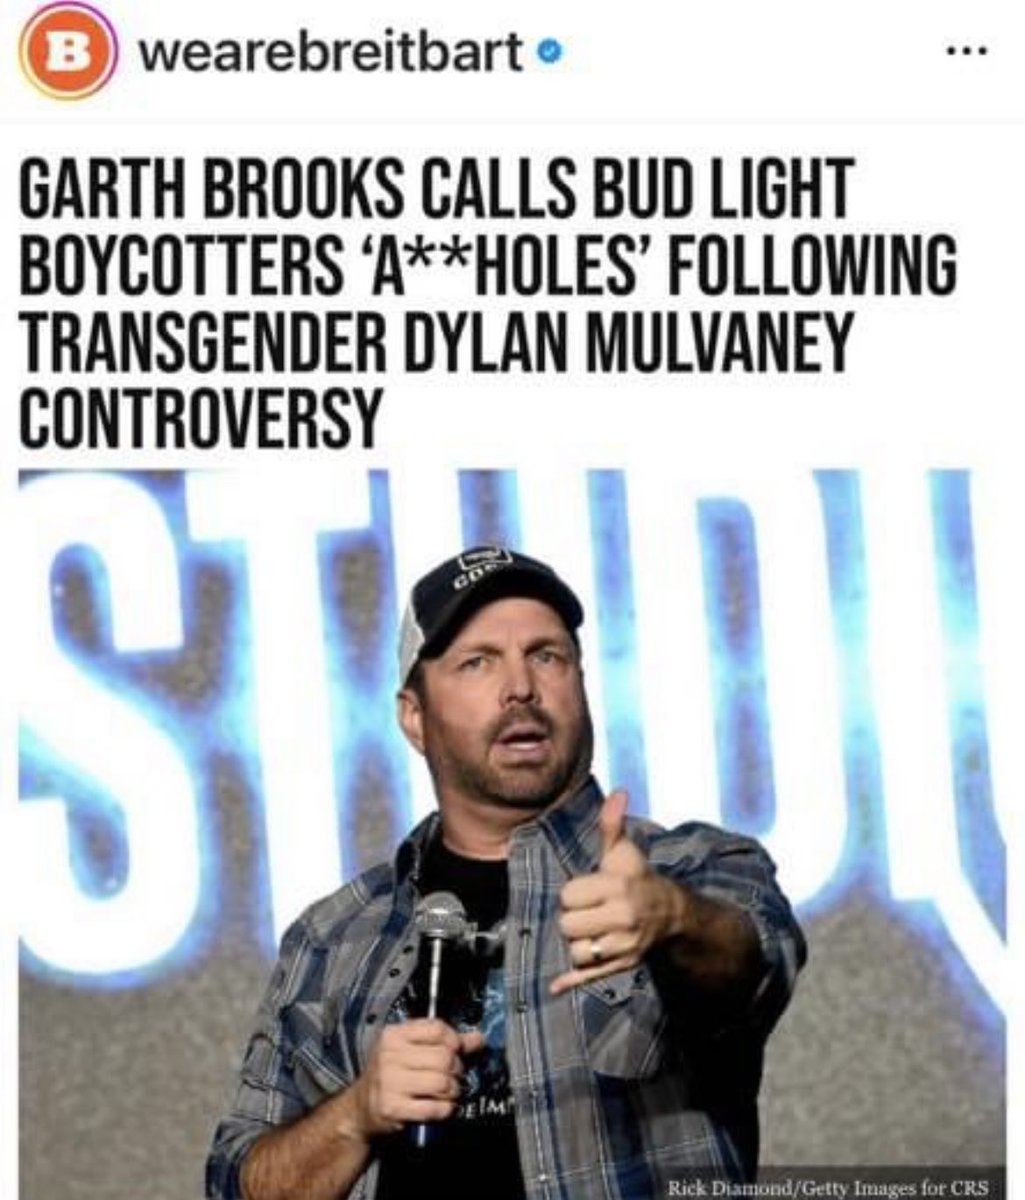 How dare Garth take the moral high ground on the people who made him famous? He started in dive bars in Stillwater, OK. He forgets who made him-HIM. This low IQ fella doesn’t realize the boycotts are part of protecting women’s rights & kids. He doesn’t need anymore of your money